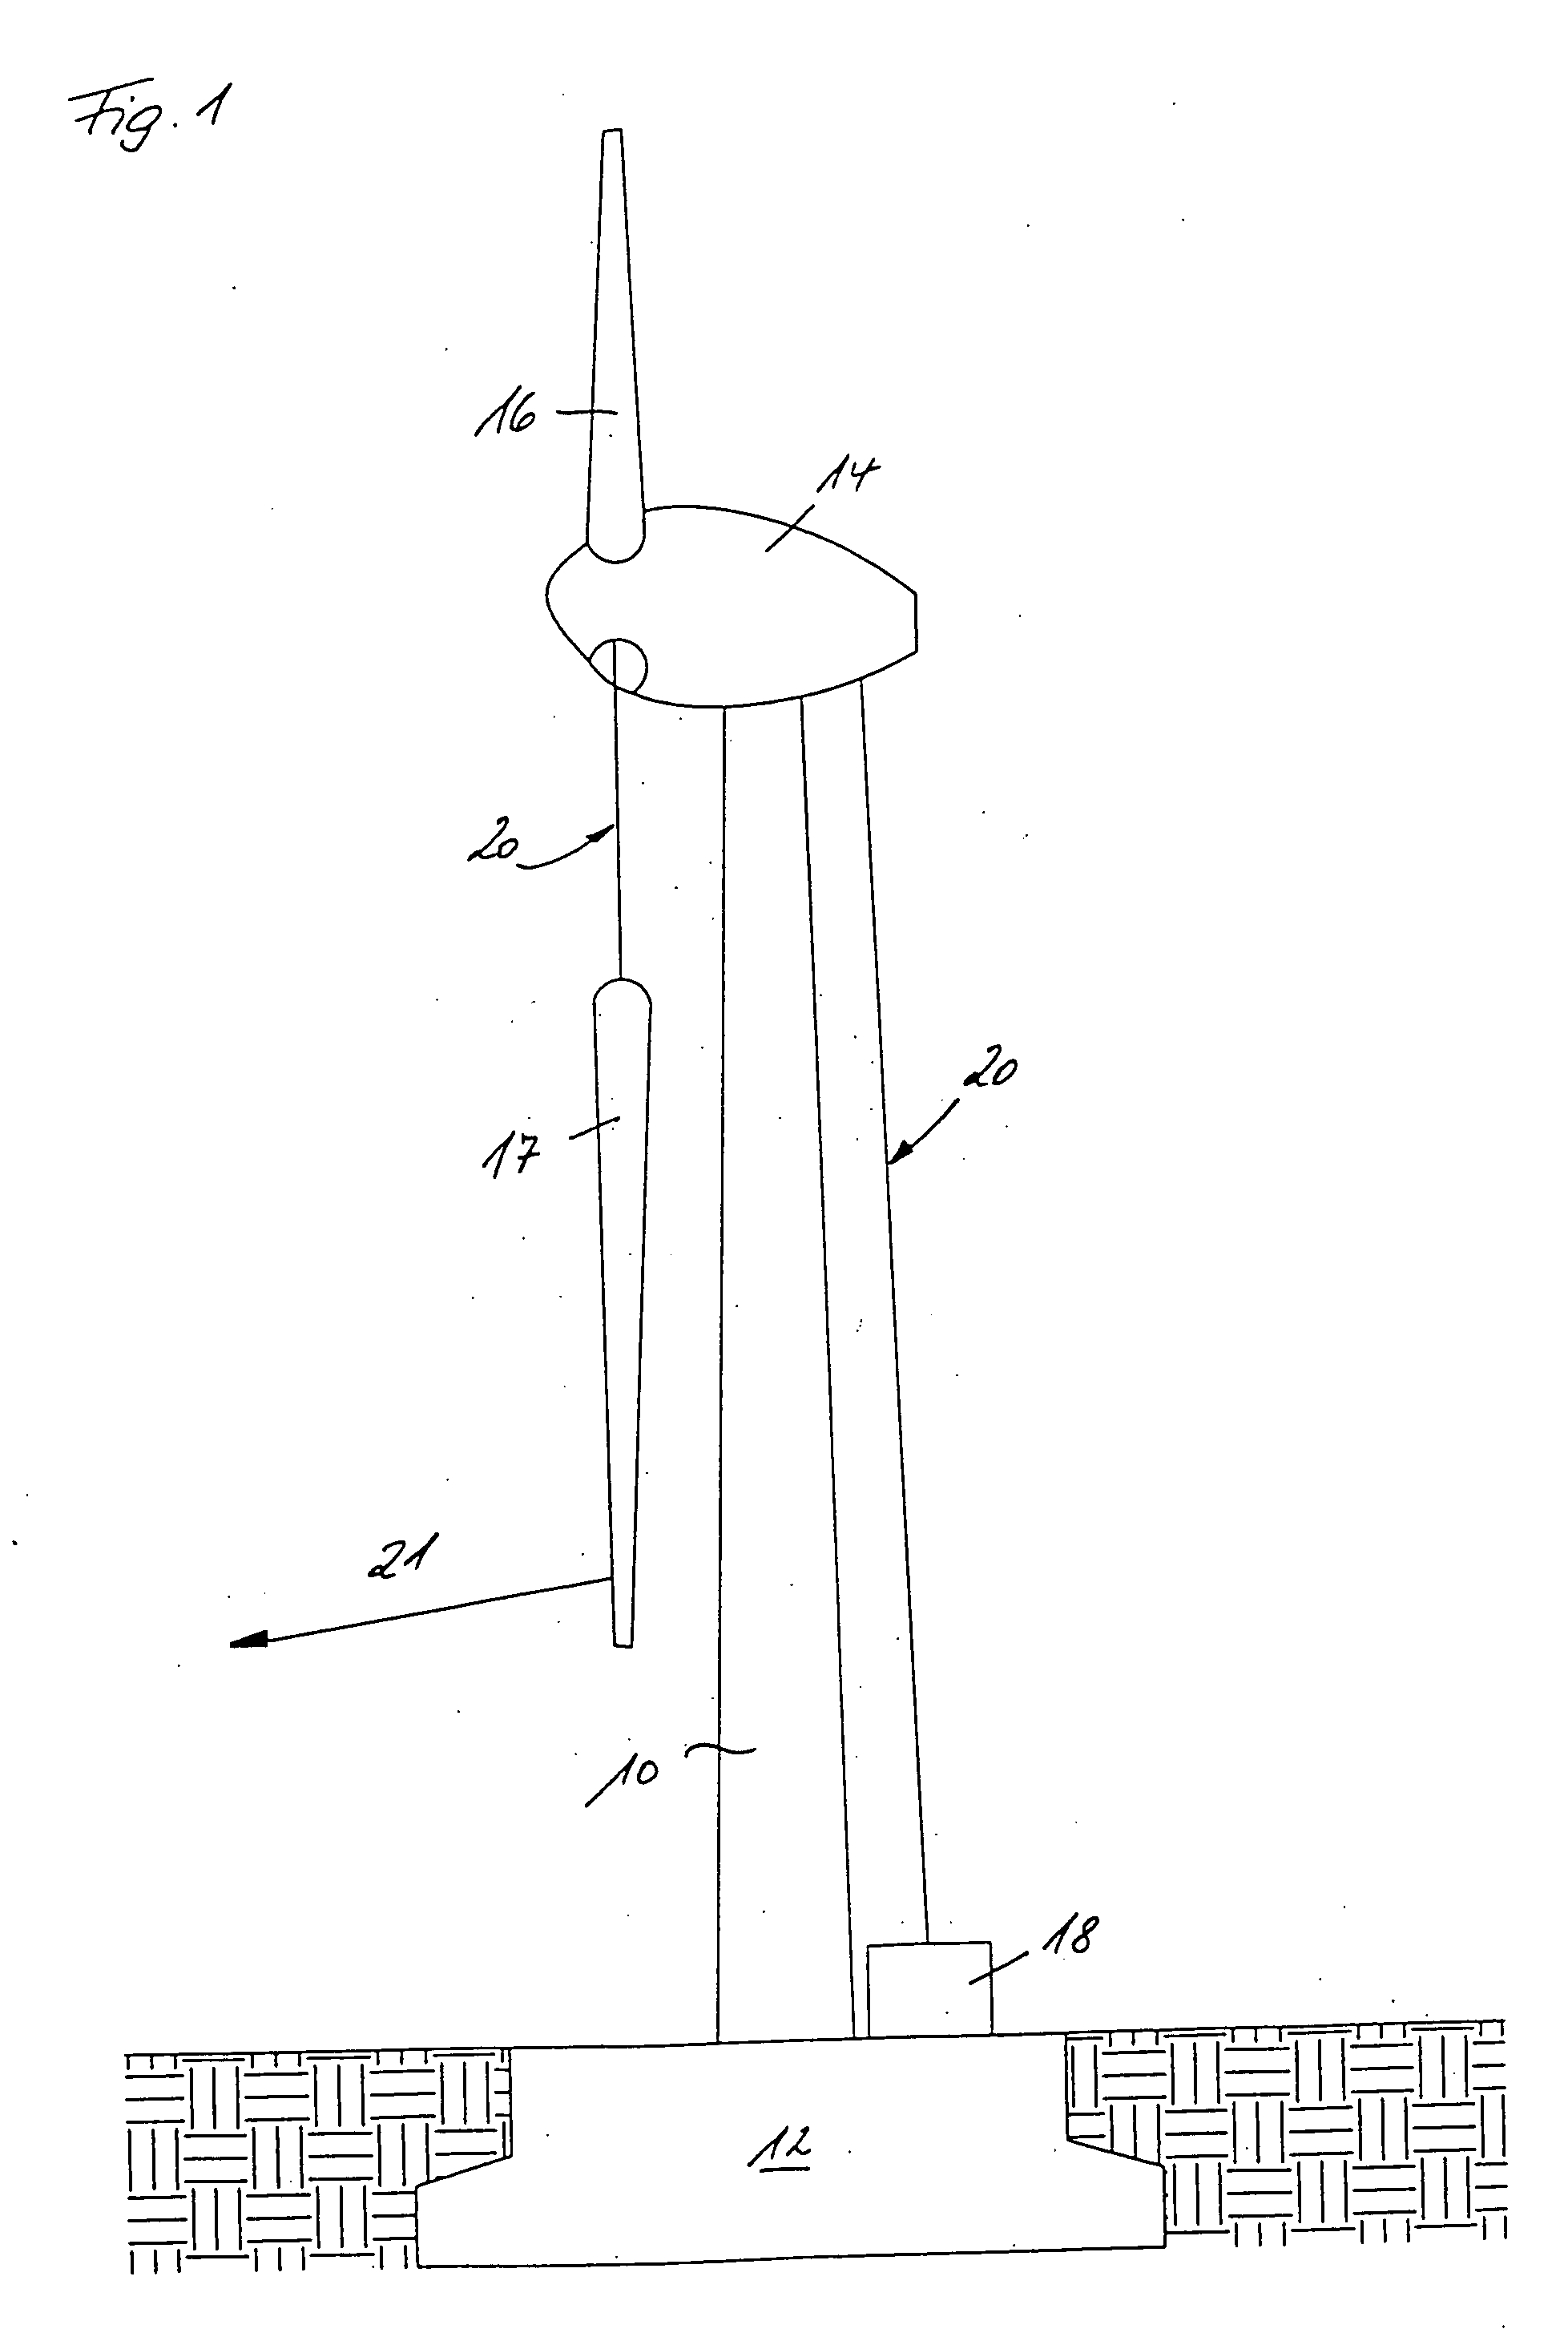 Method for assembling/dismounting components of a wind power plant